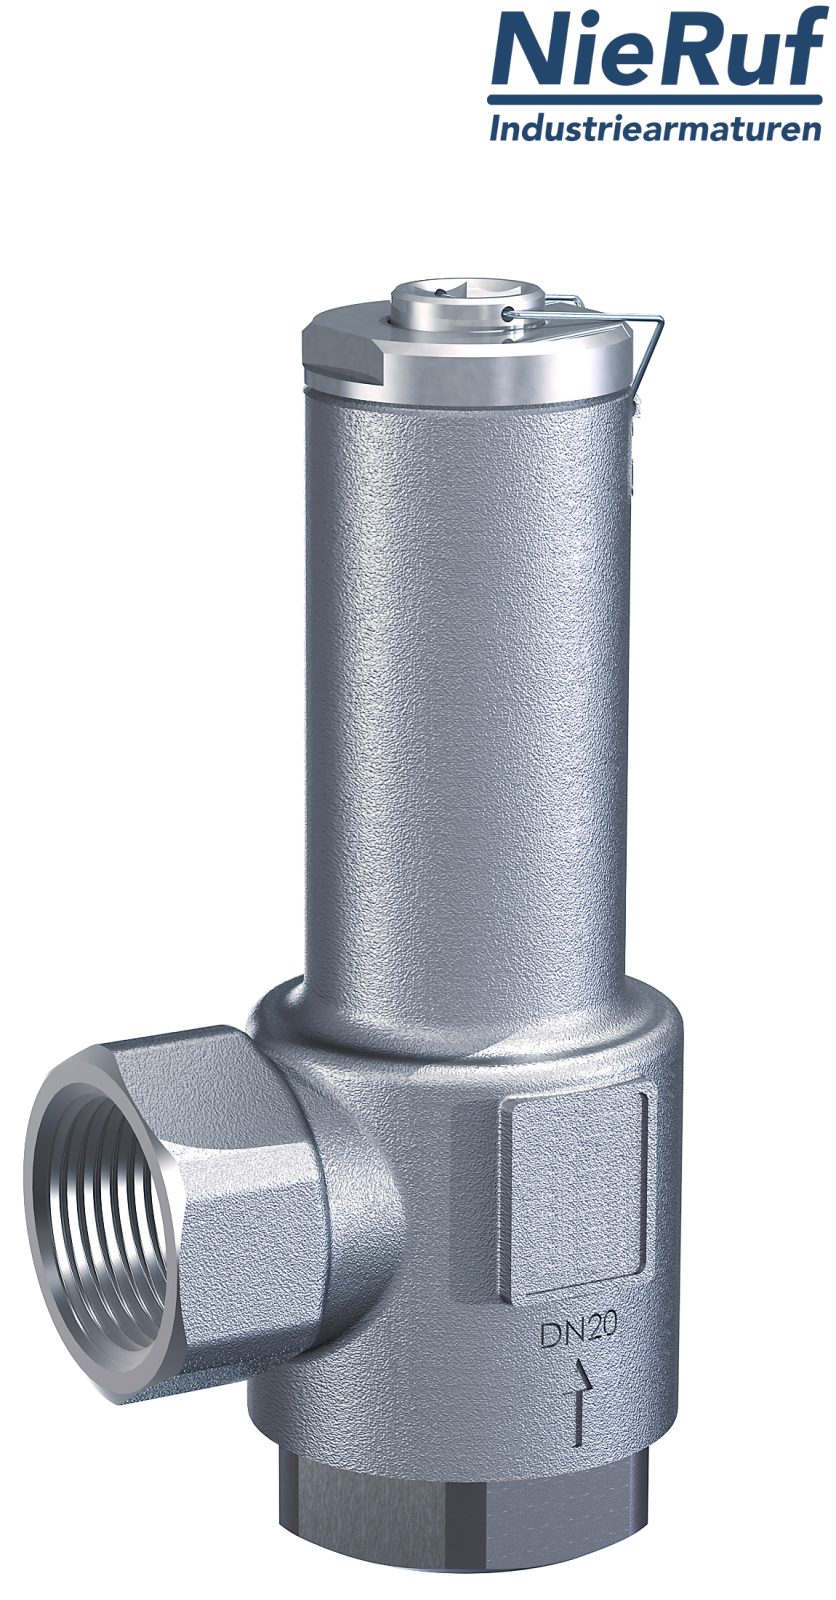 angle-type overflow valve 1 1/4" inch fm UV03 stainless steel AISI 316L 2 - 12 bar